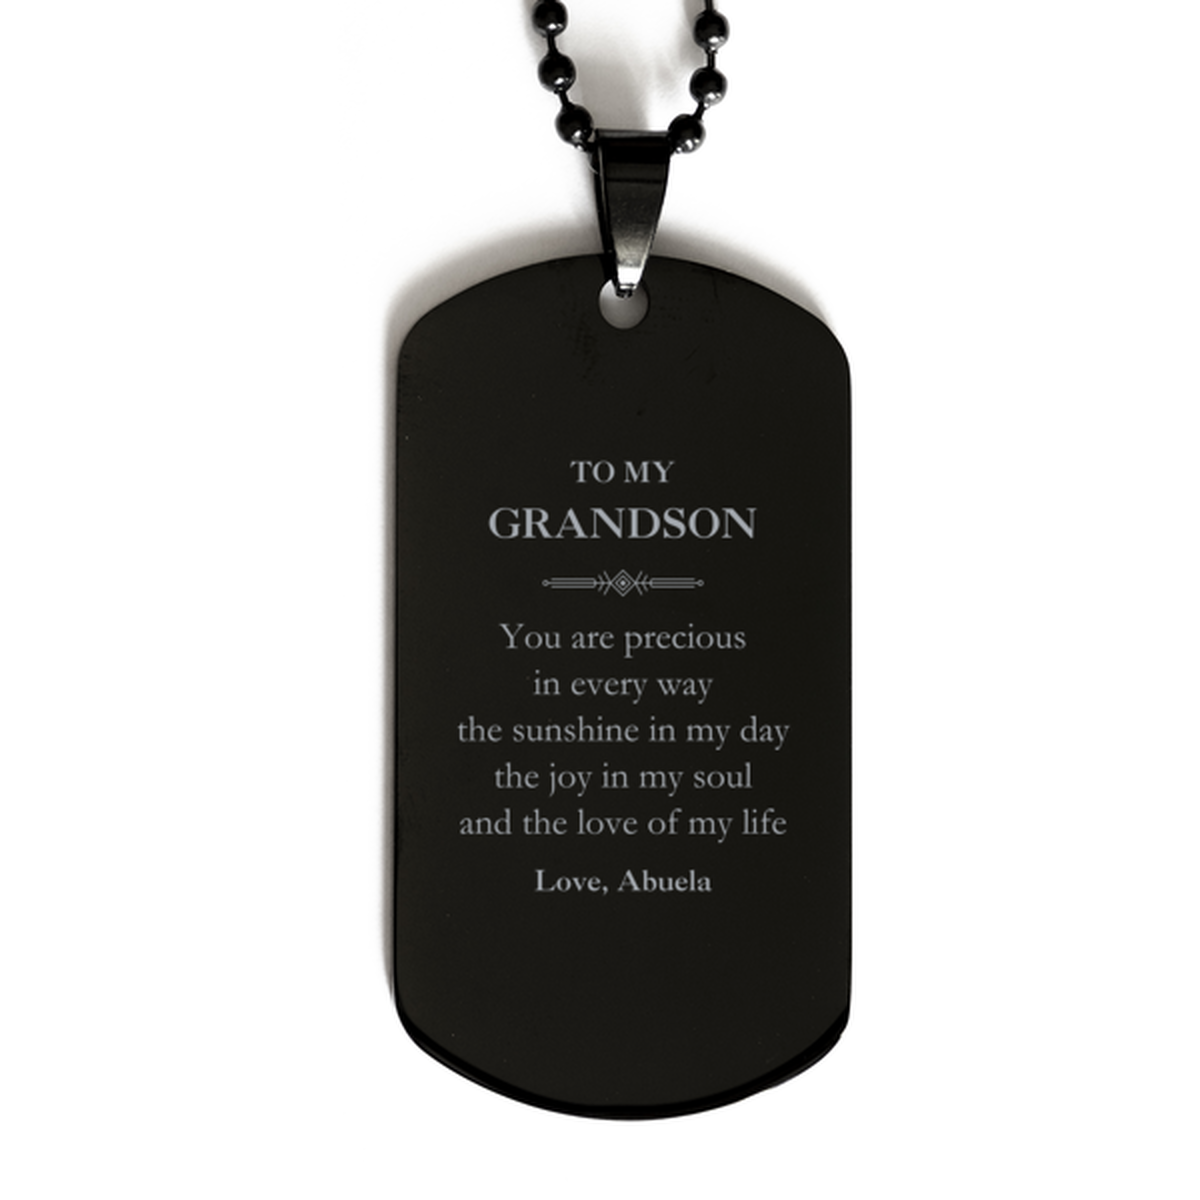 Graduation Gifts for Grandson Black Dog Tag Present from Abuela, Christmas Grandson Birthday Gifts Grandson You are precious in every way the sunshine in my day. Love, Abuela